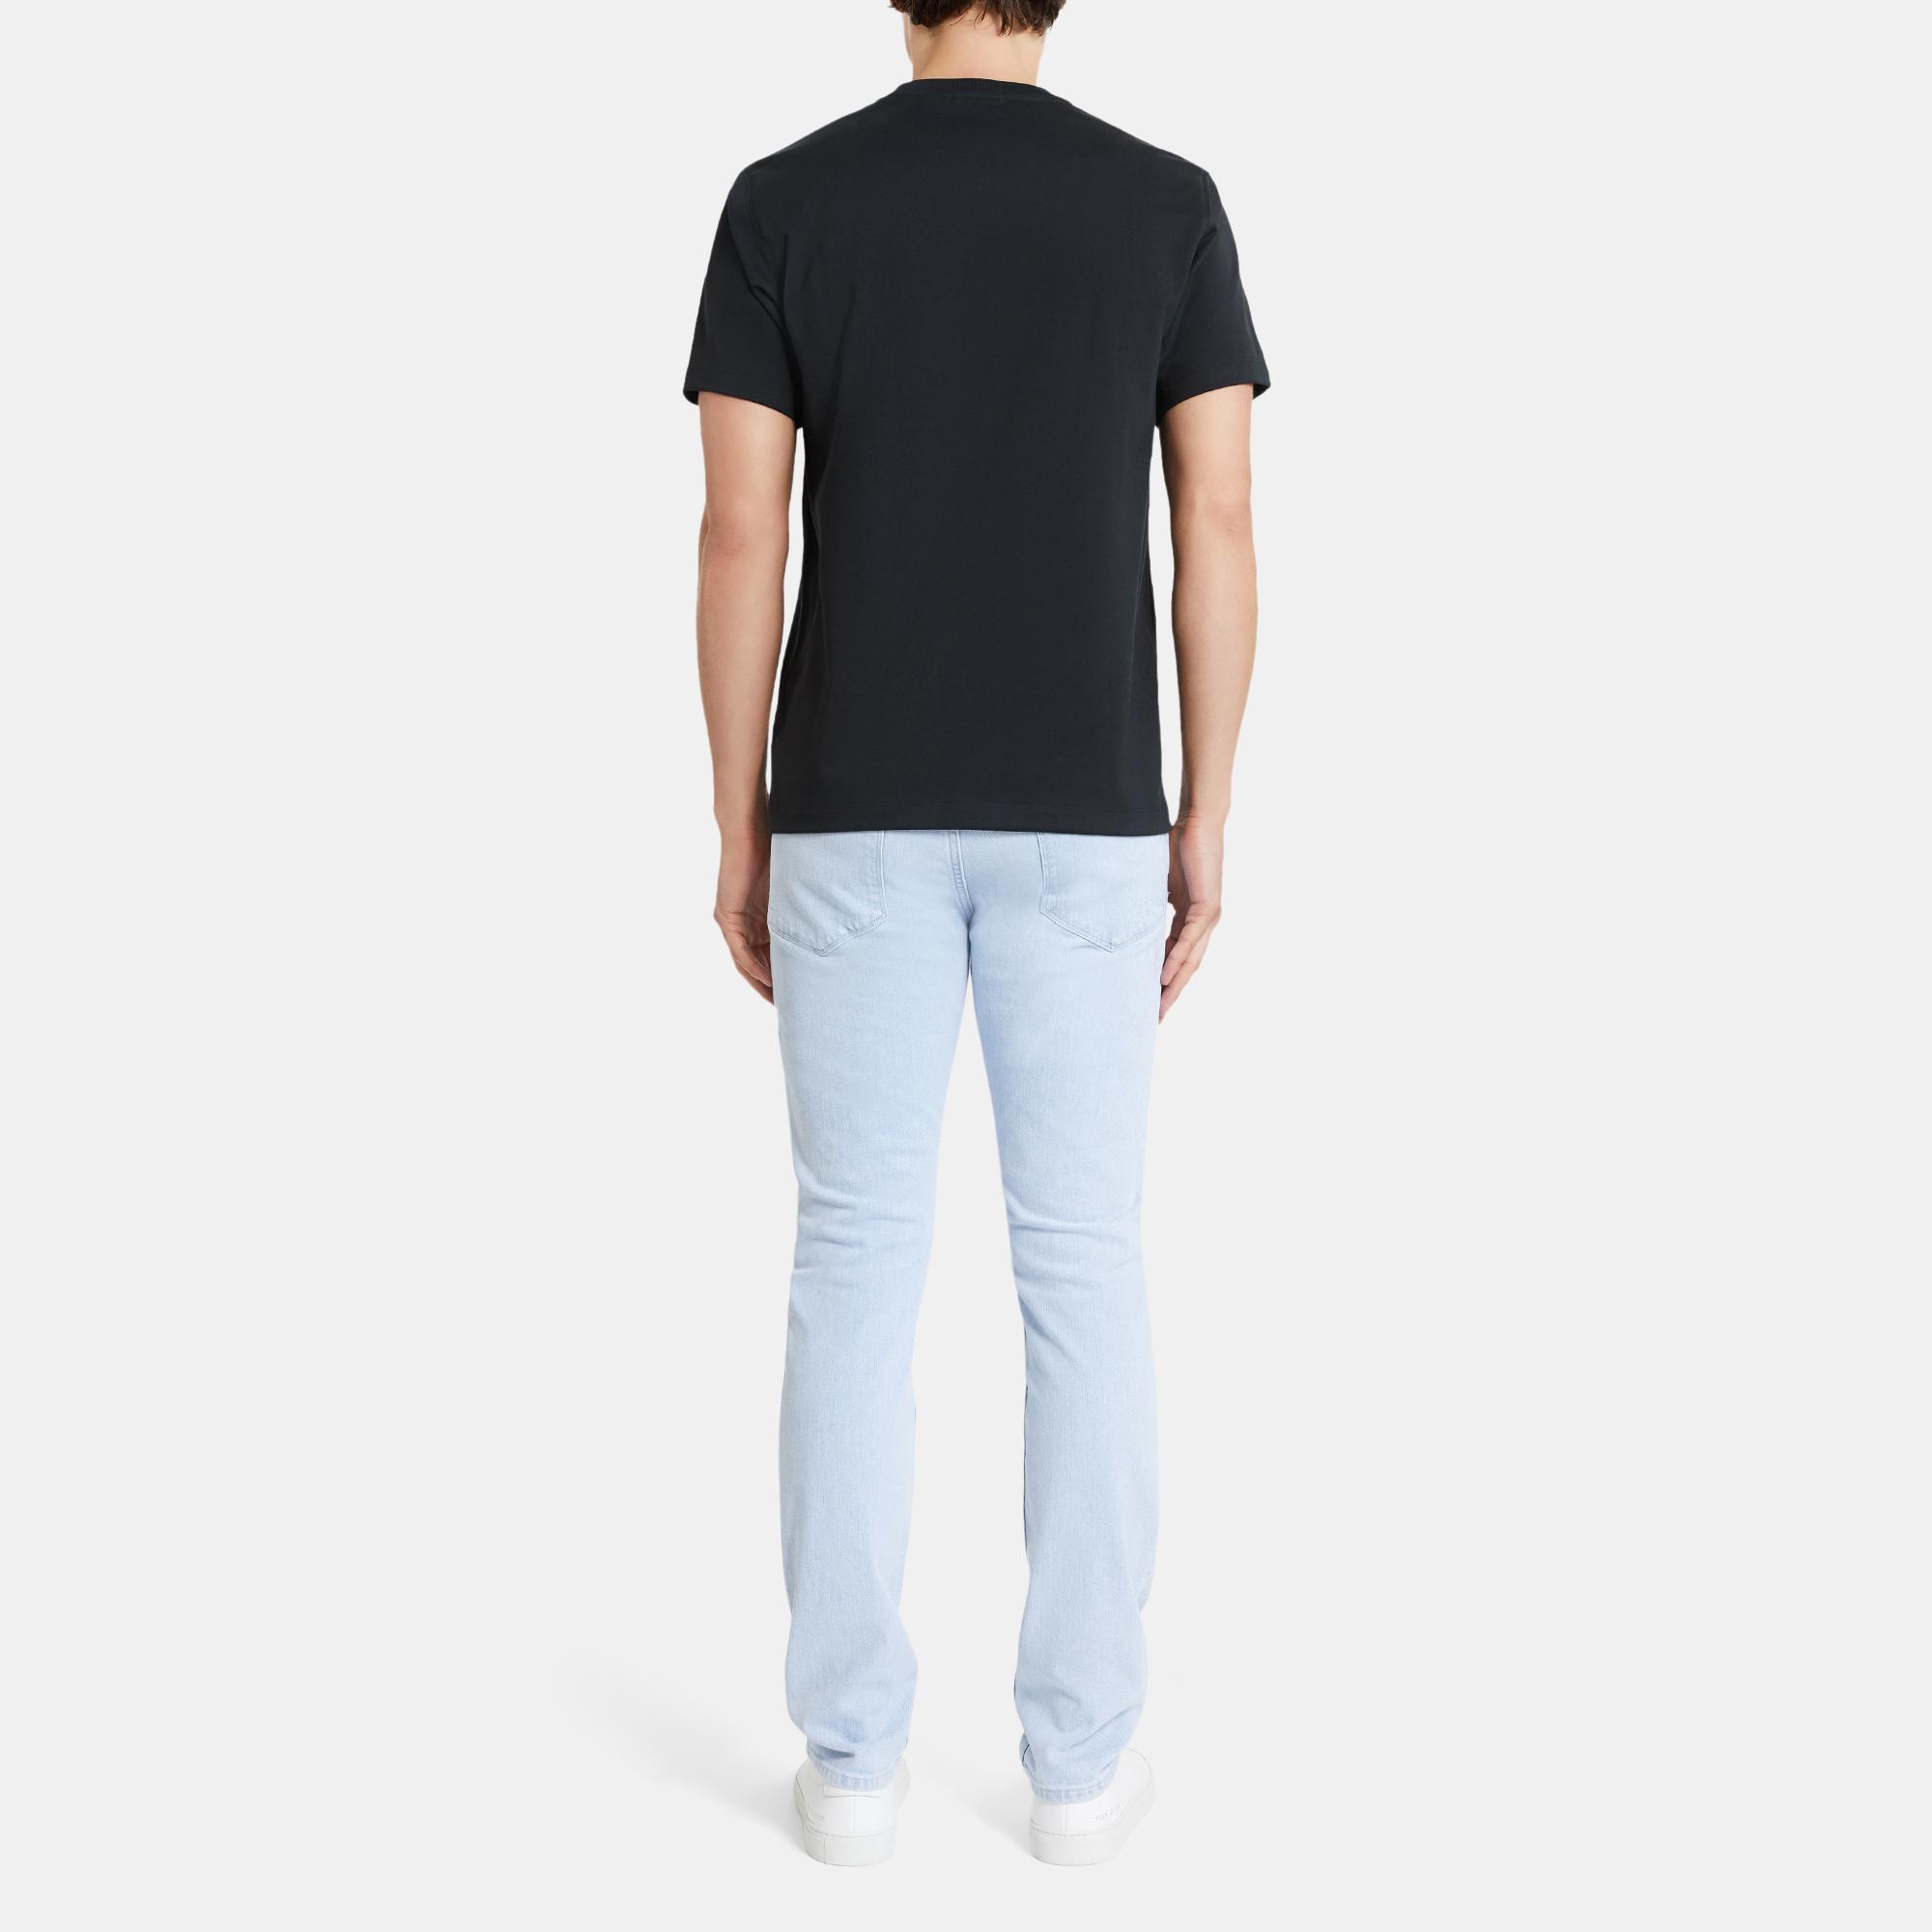 DEX TEE P | Theory Outlet